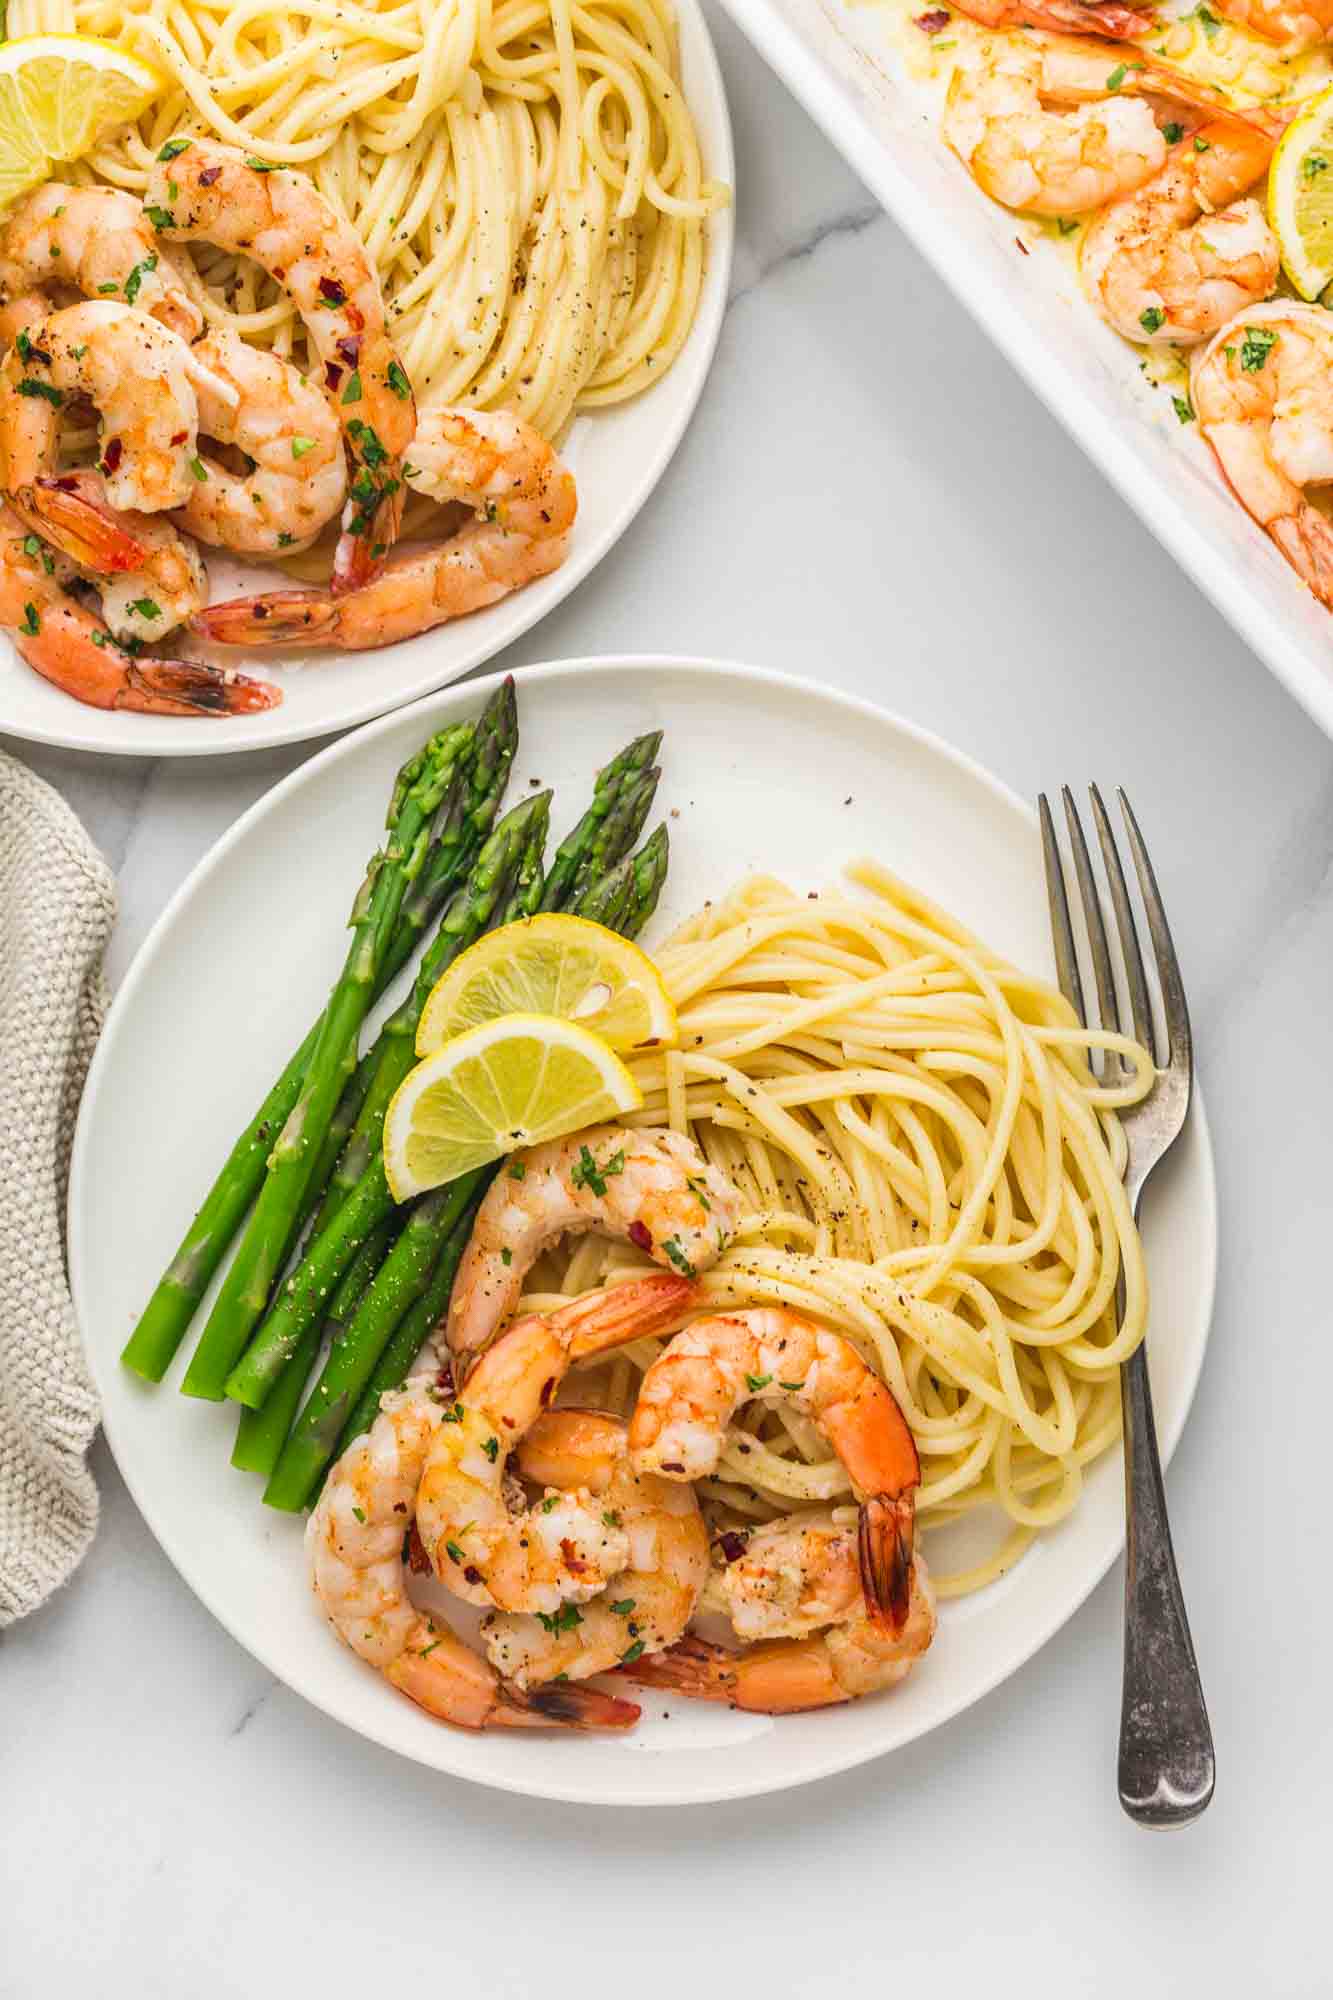 Bakeed shrimp served in two white plates with pasta and asparagus